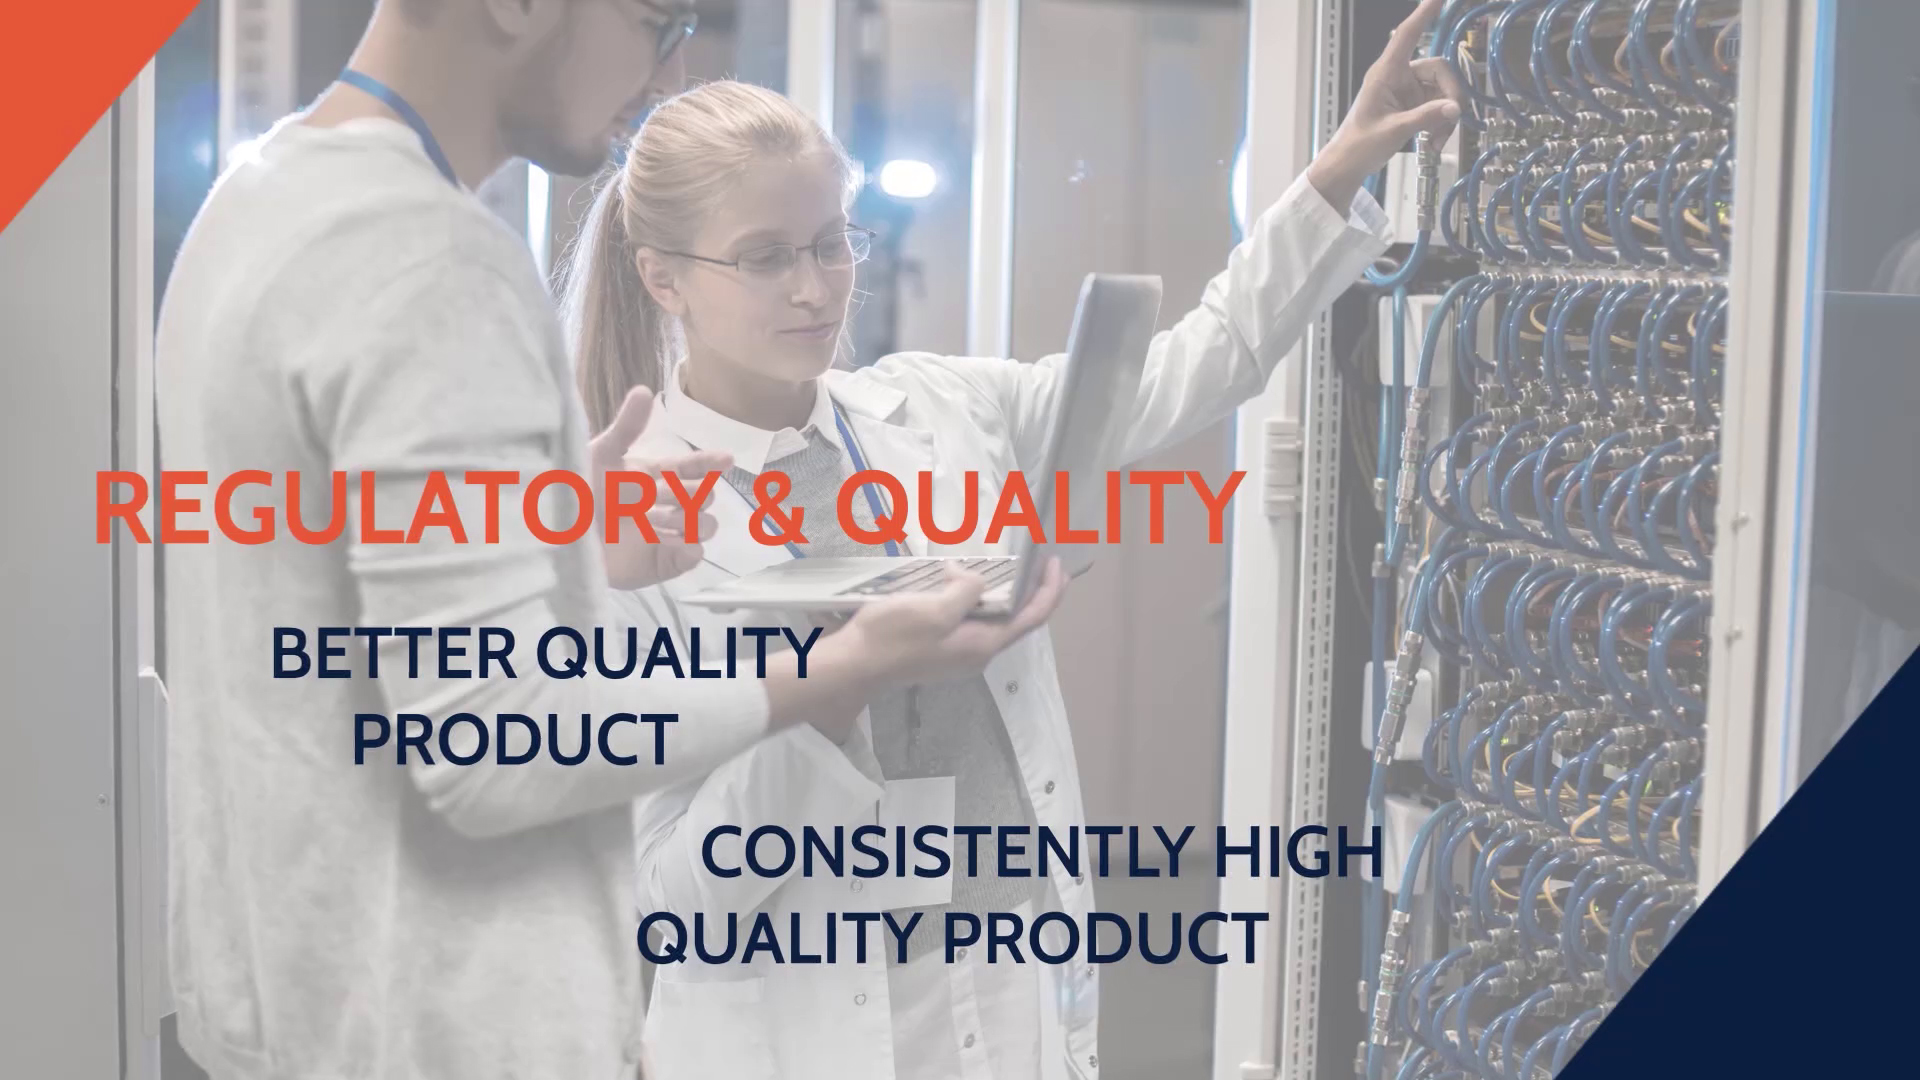 By adopting a PAT enabled control strategy, manufacturers can obtain consistently high-quality products.